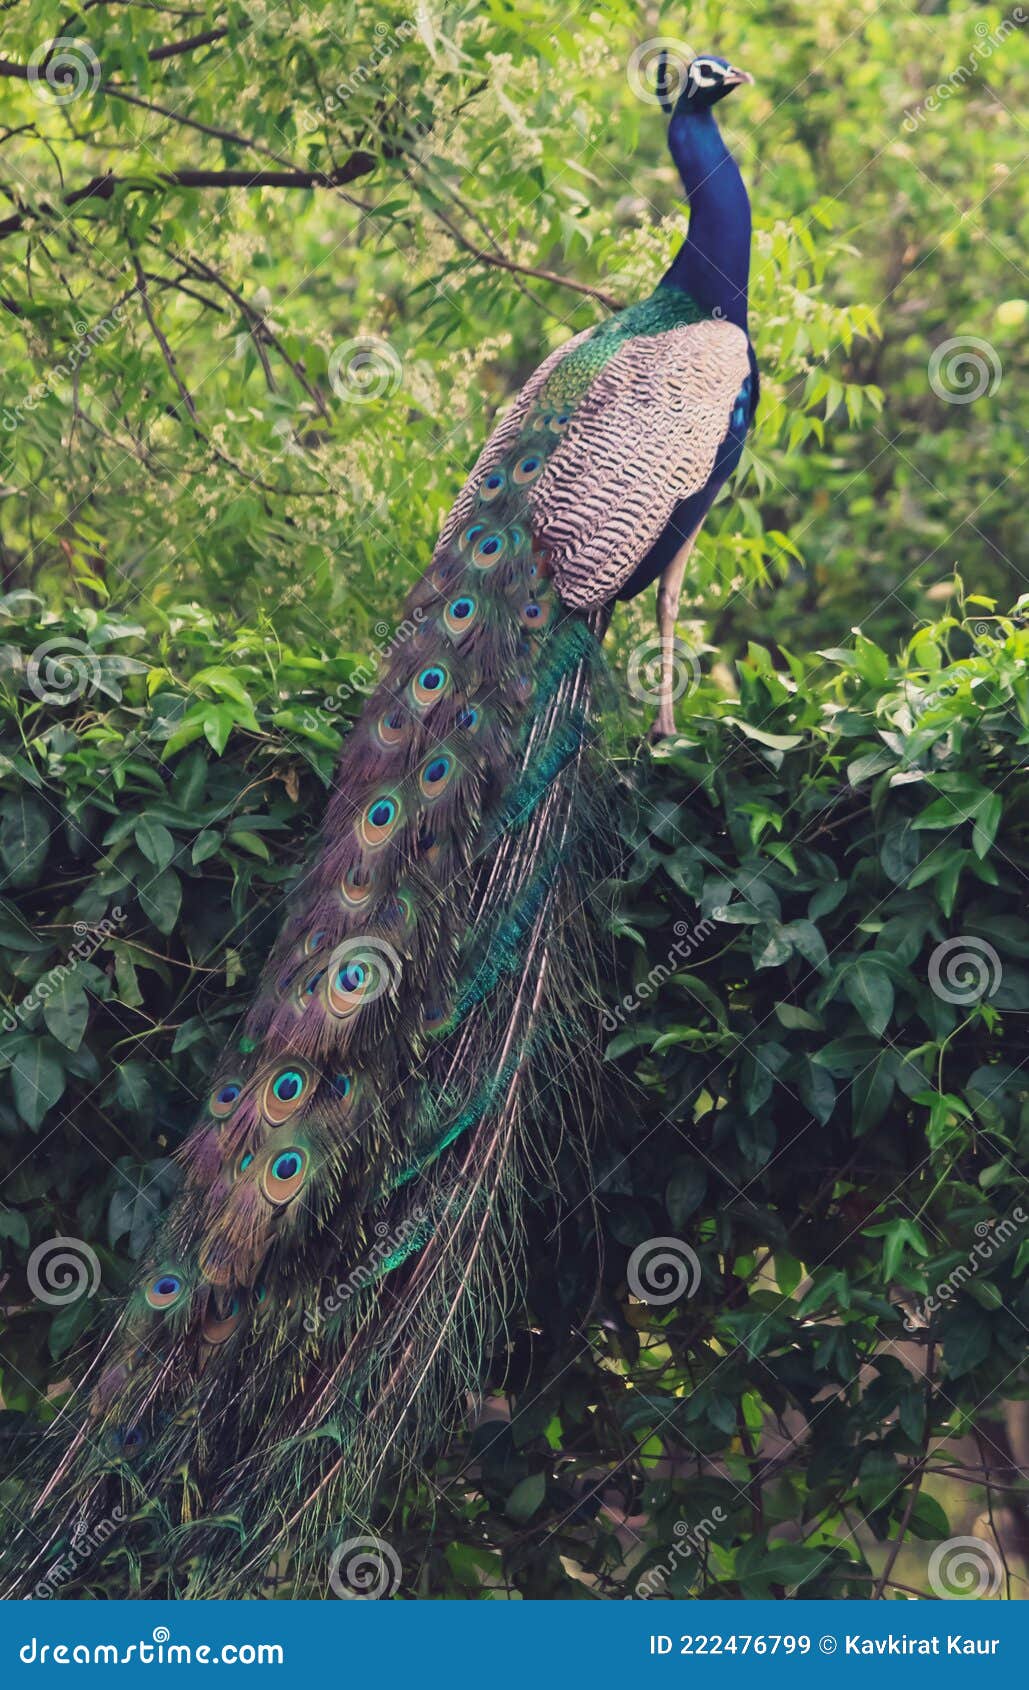 Indian National Bird Peacock with Feathers Posing Stock Image - Image of  blue, pride: 222476799